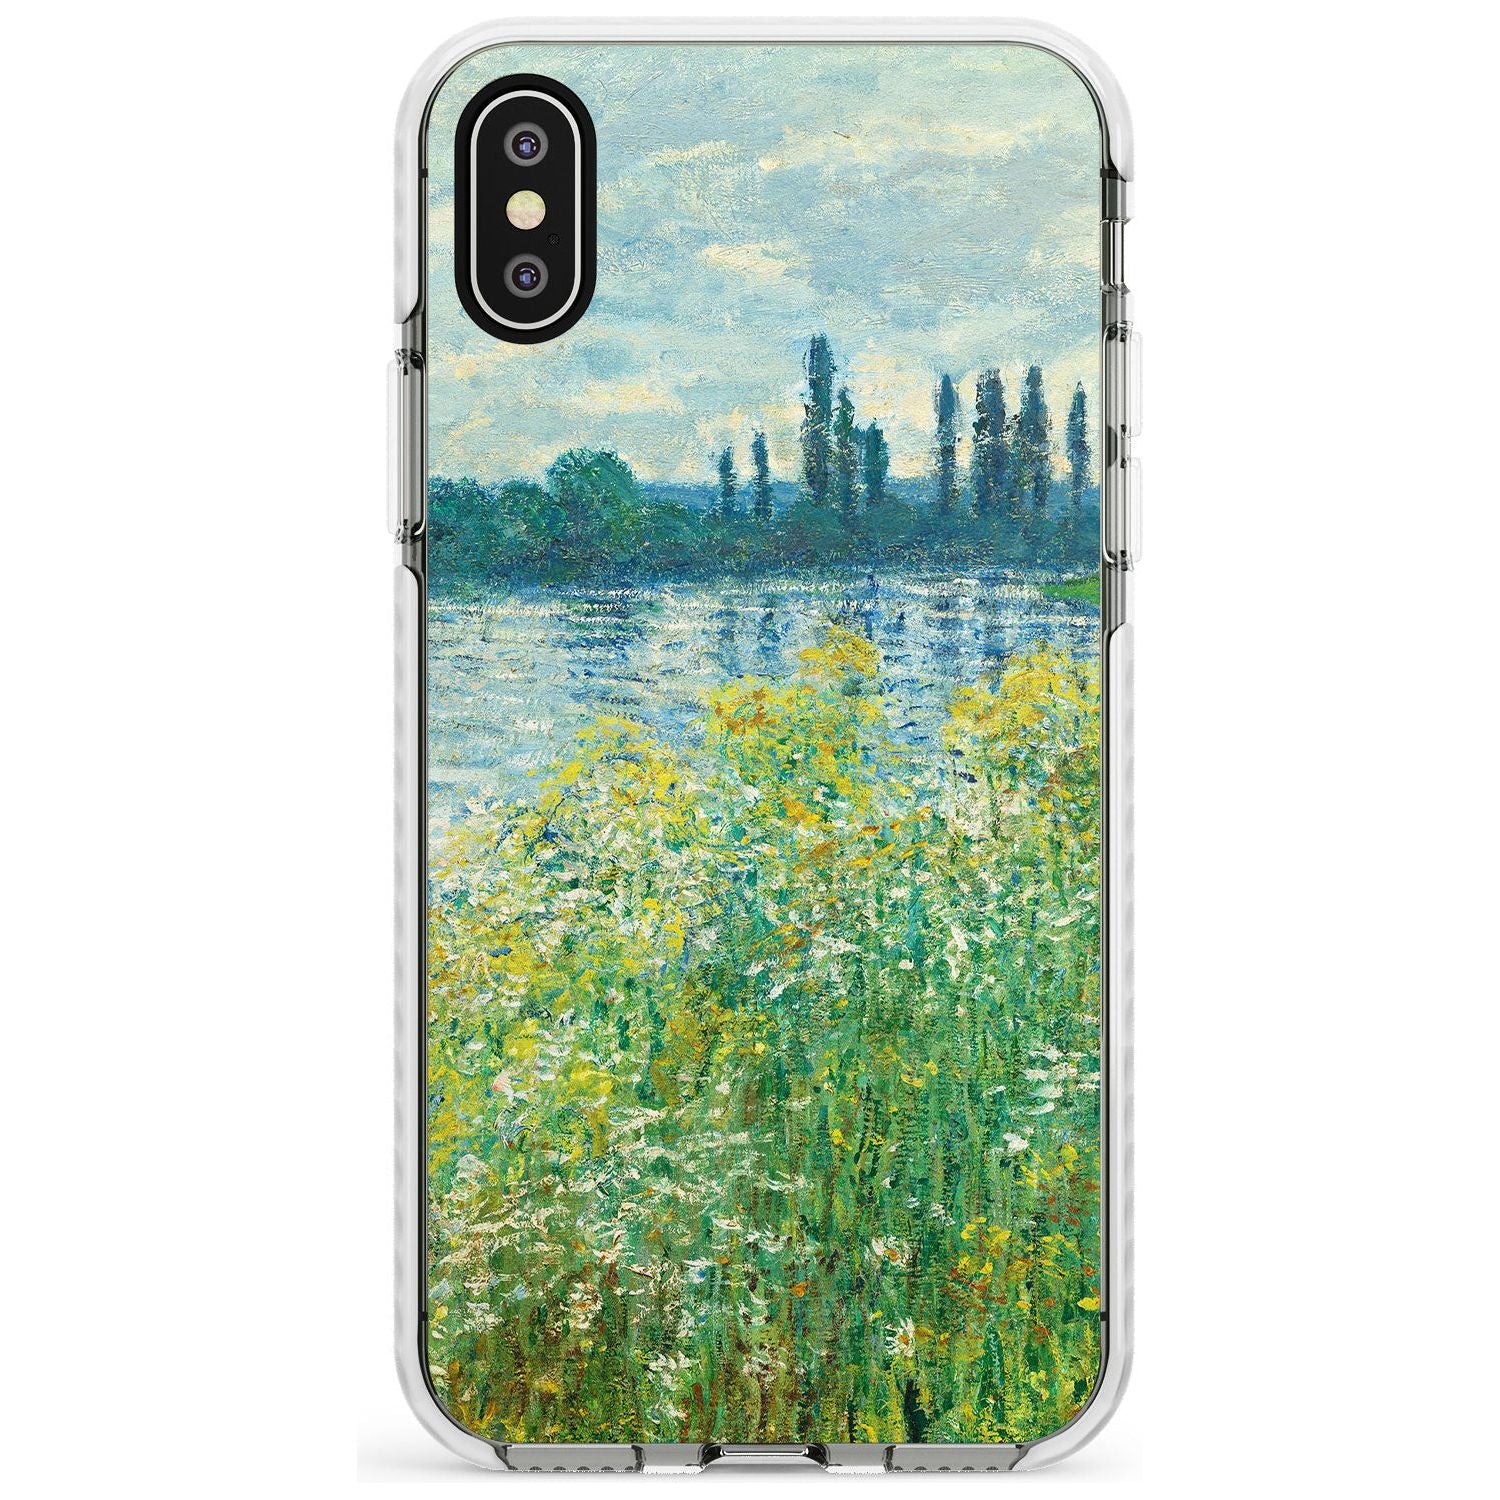 Banks of the Seine by Claude Monet Slim TPU Phone Case Warehouse X XS Max XR